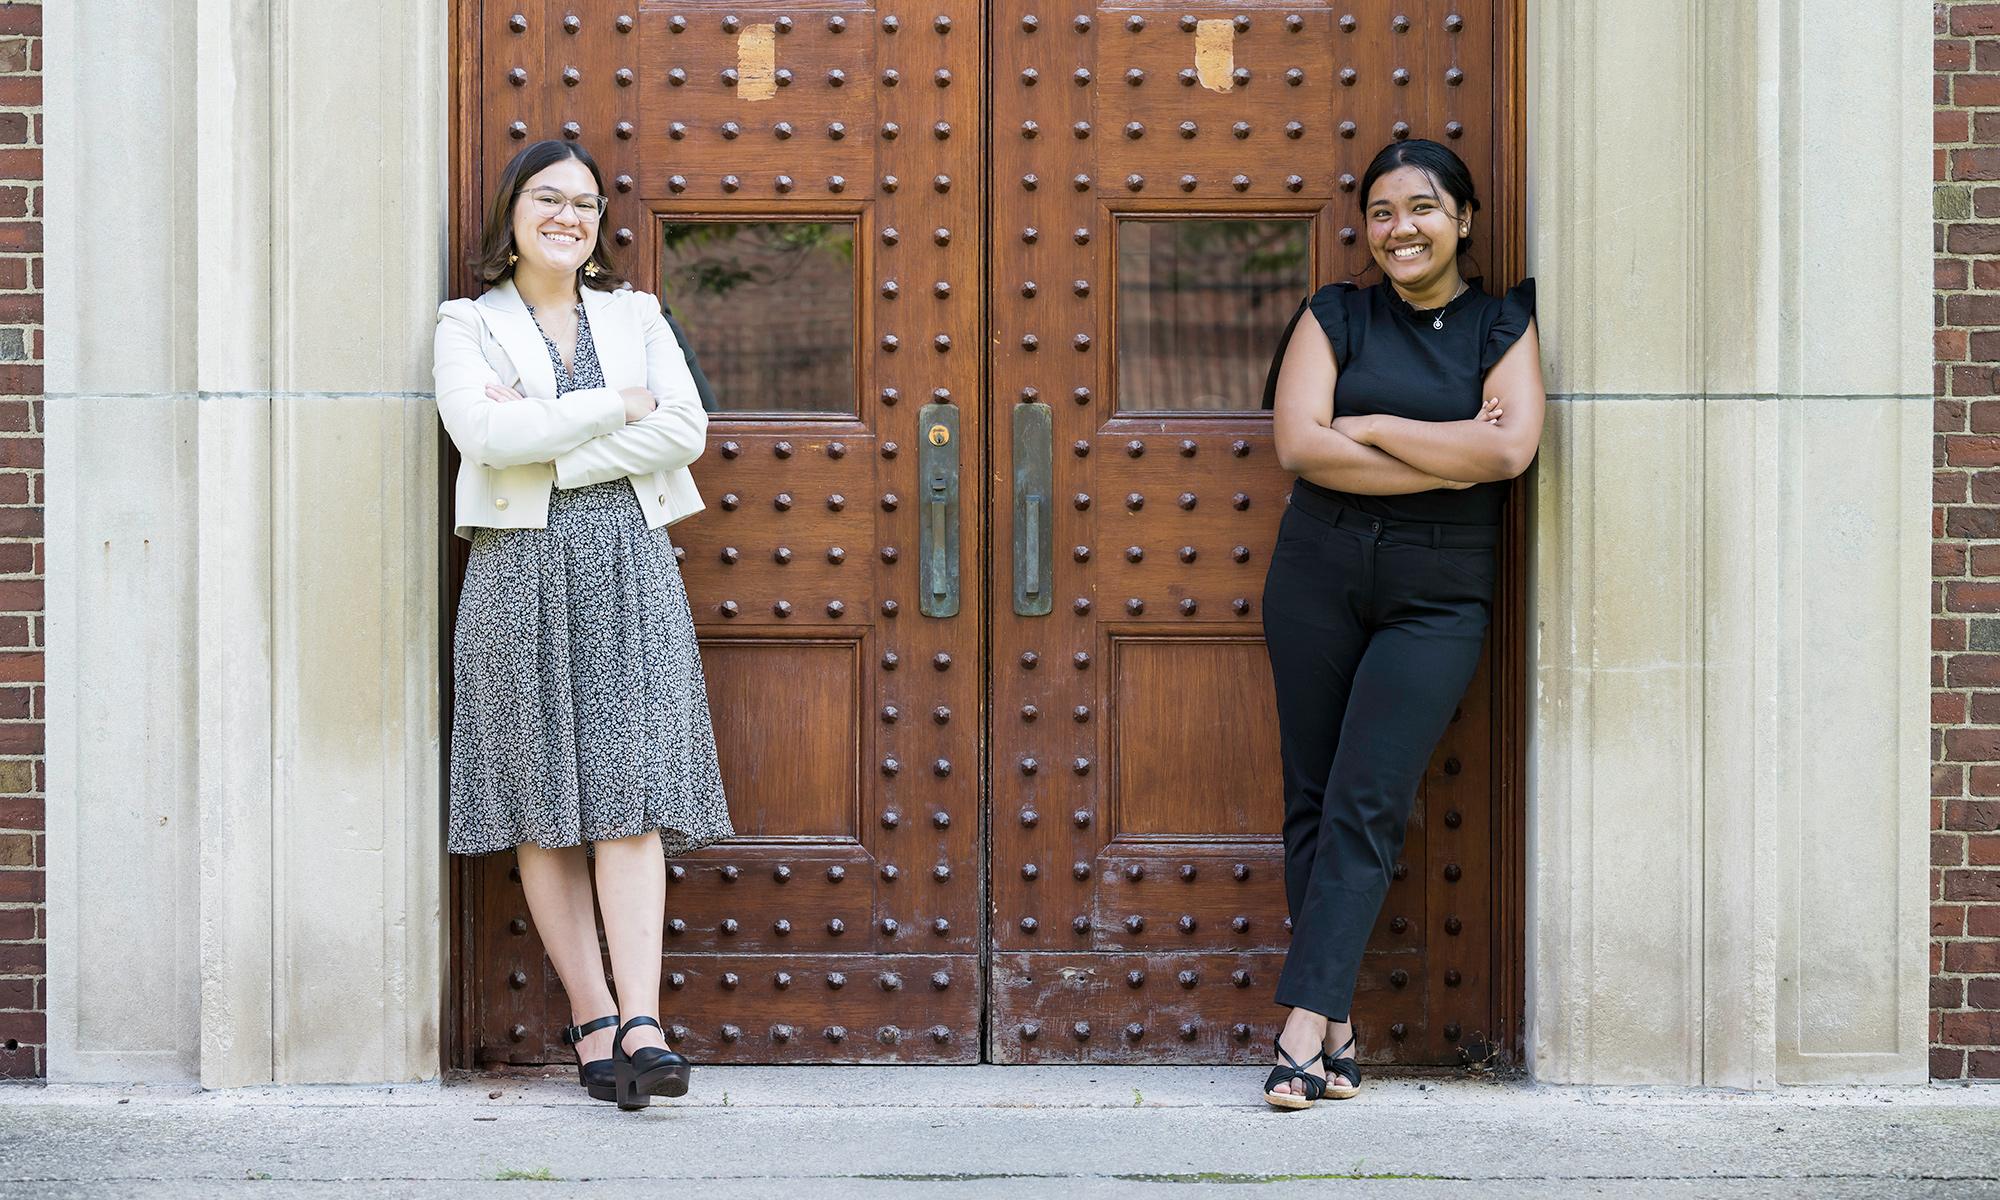 Mara Criollo-Rivera and Kristel Kezia Sagabaen Layugan smile as they pose for a photo leaning against the doors of Rush Rhees Library.